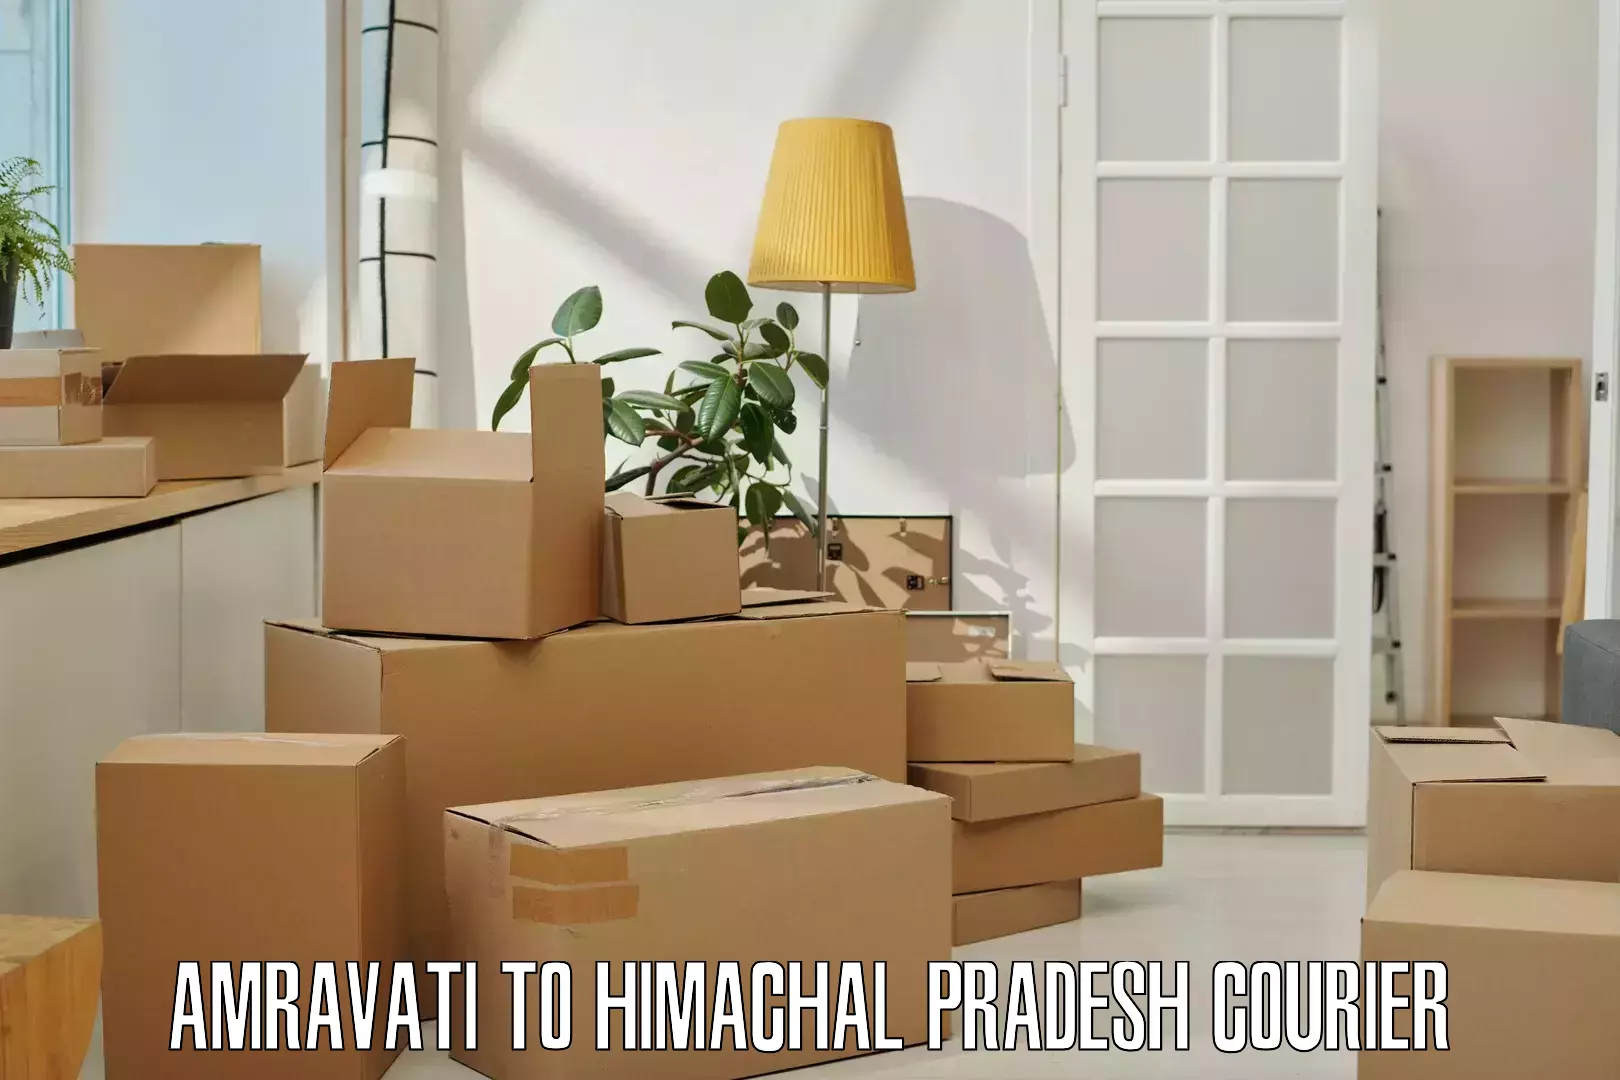 24-hour courier service Amravati to Waknaghat